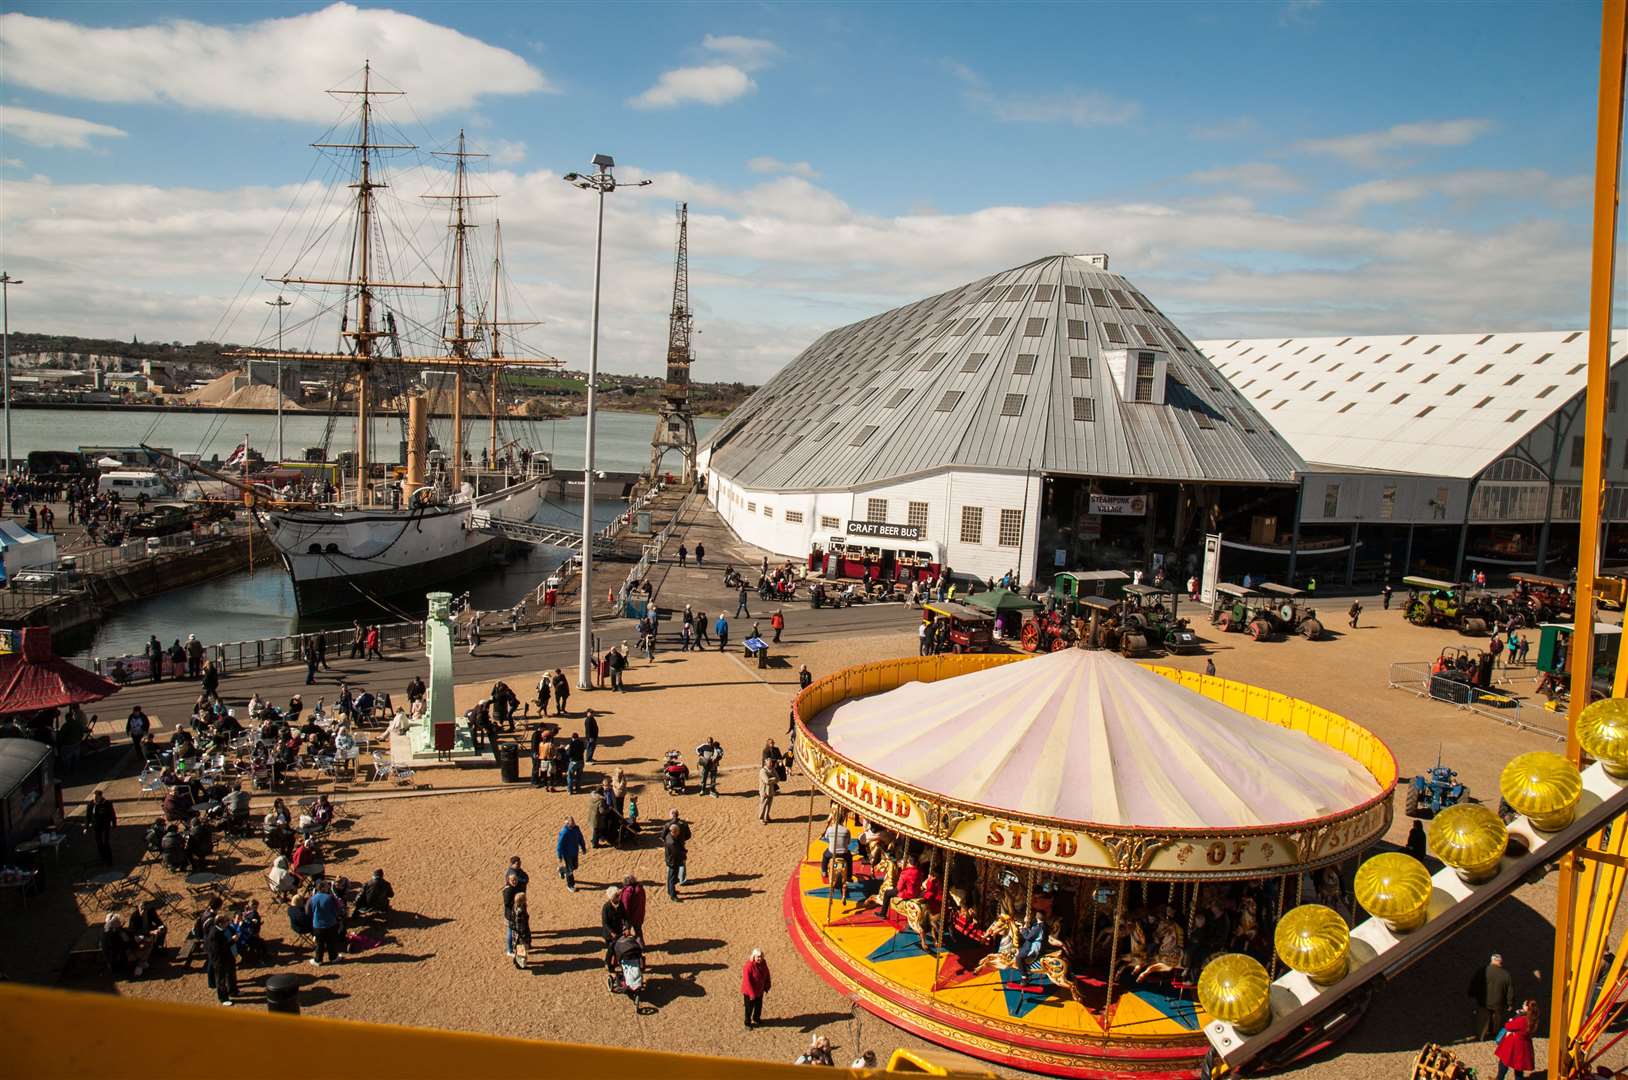 The Festival of Steam and Transport, hosted at the Chatham Historic Dockyard